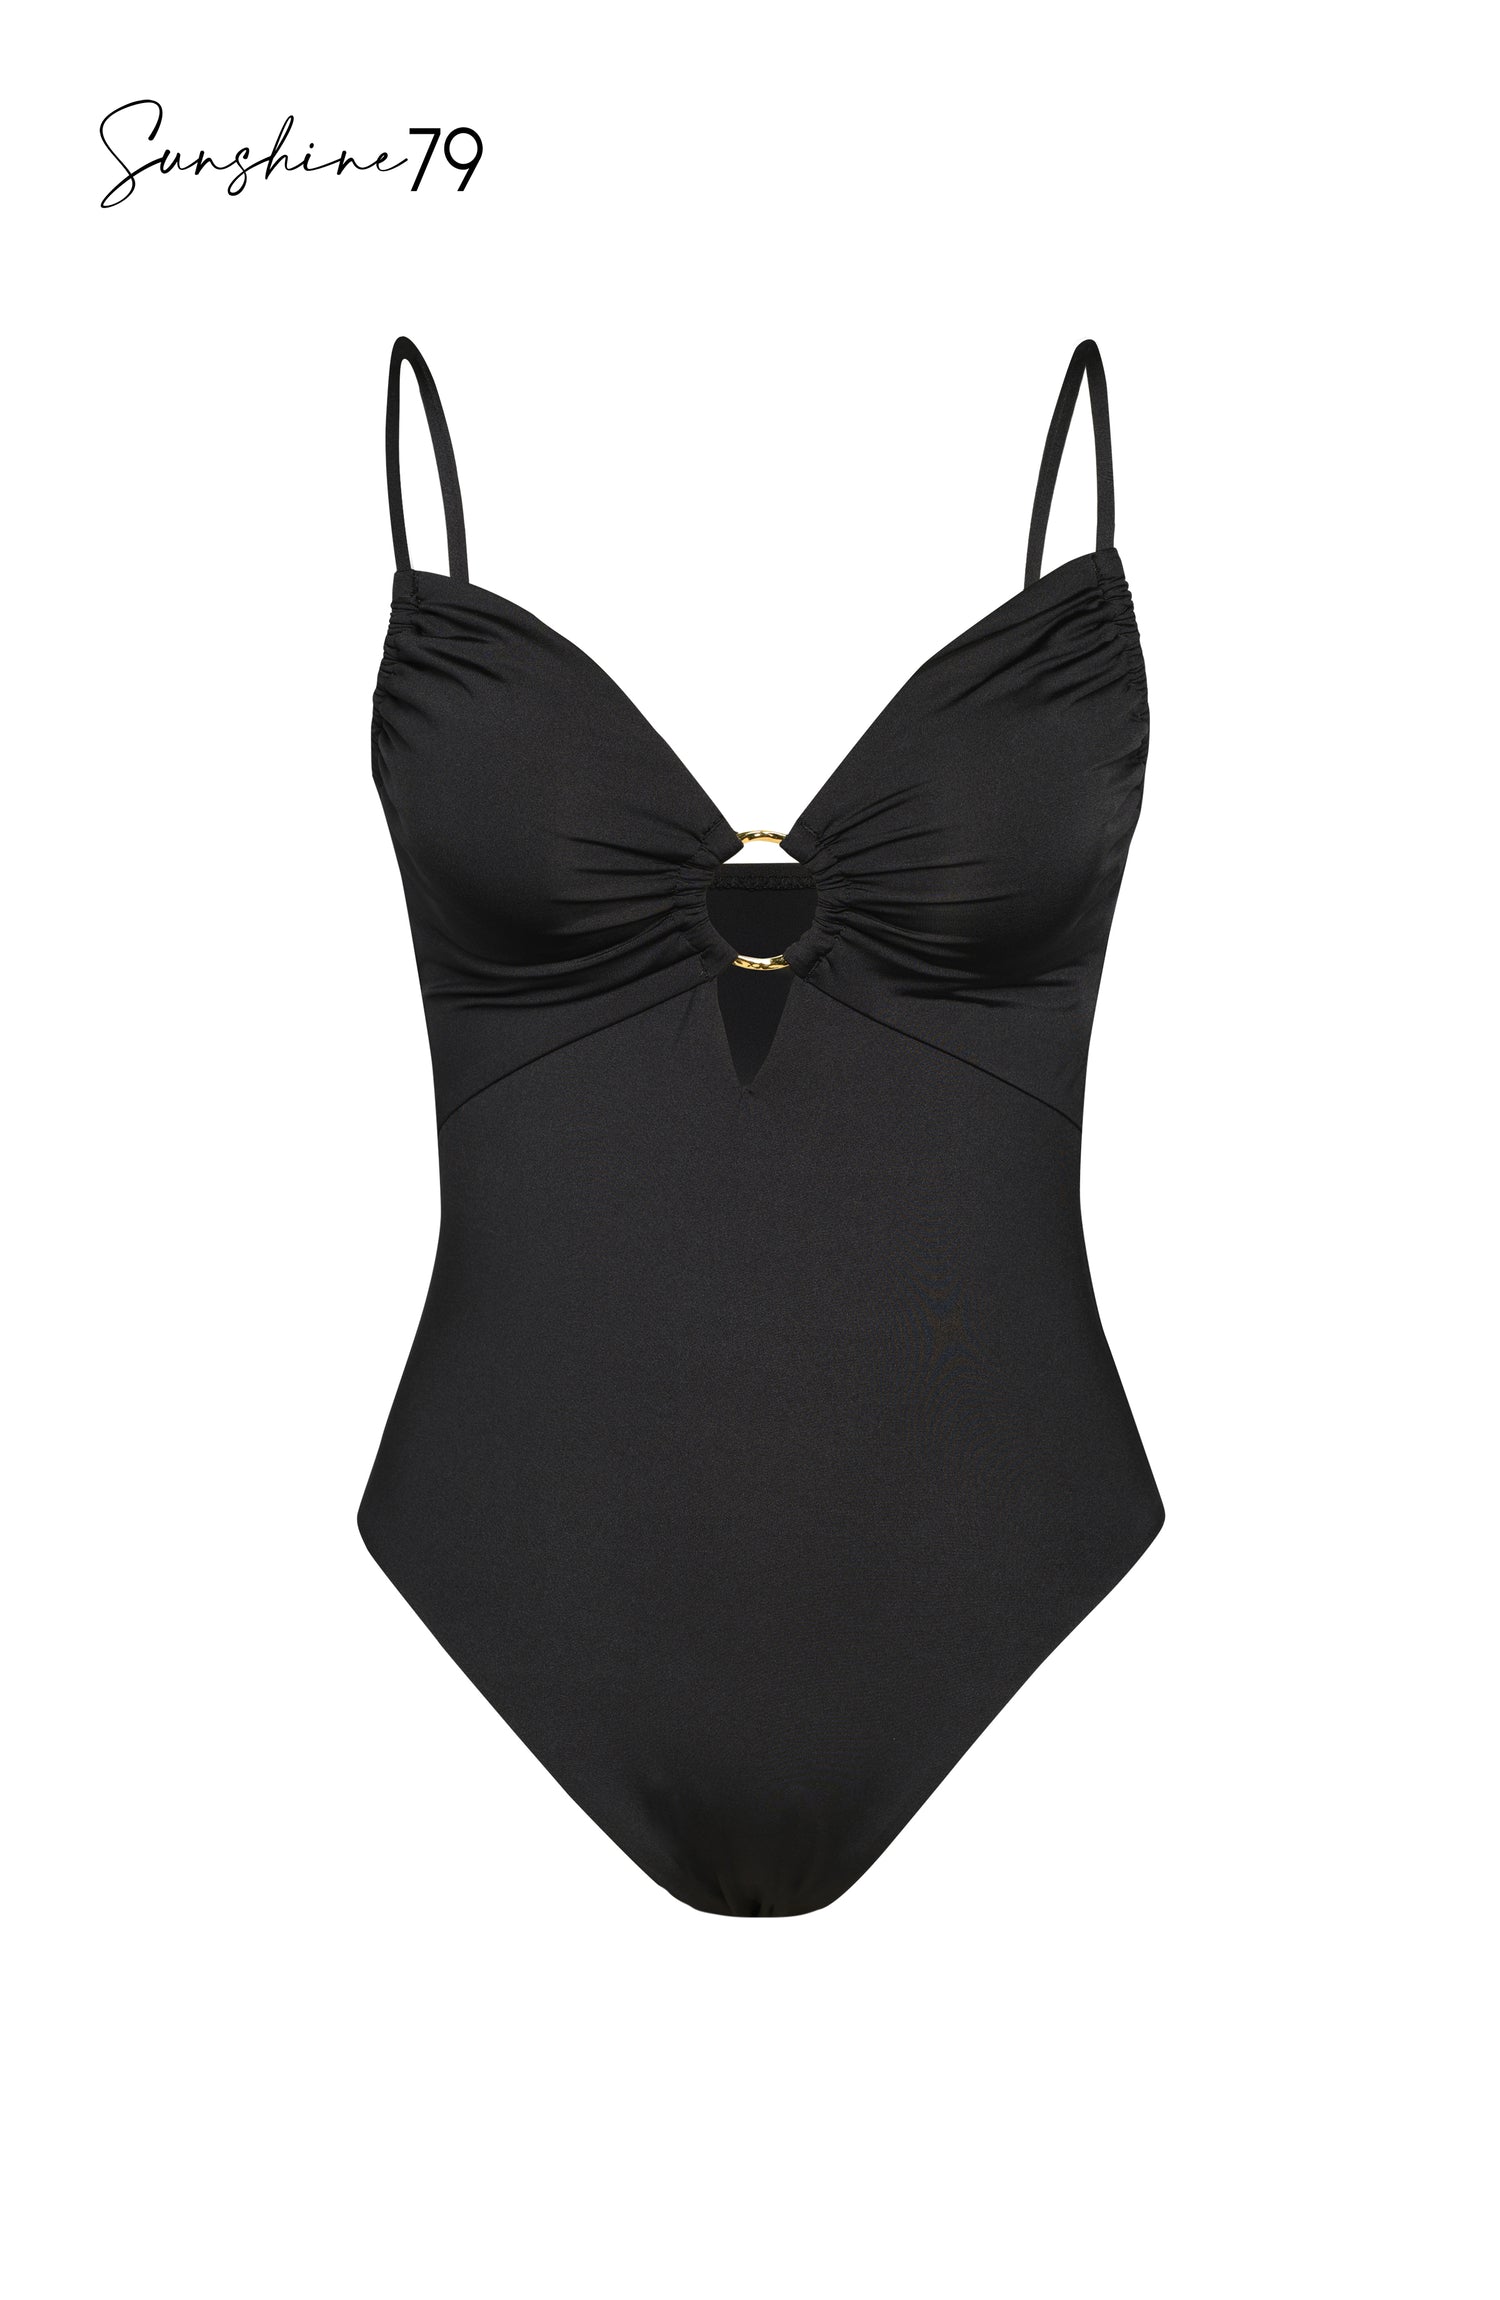 Black one piece swimsuit with a ring in the center